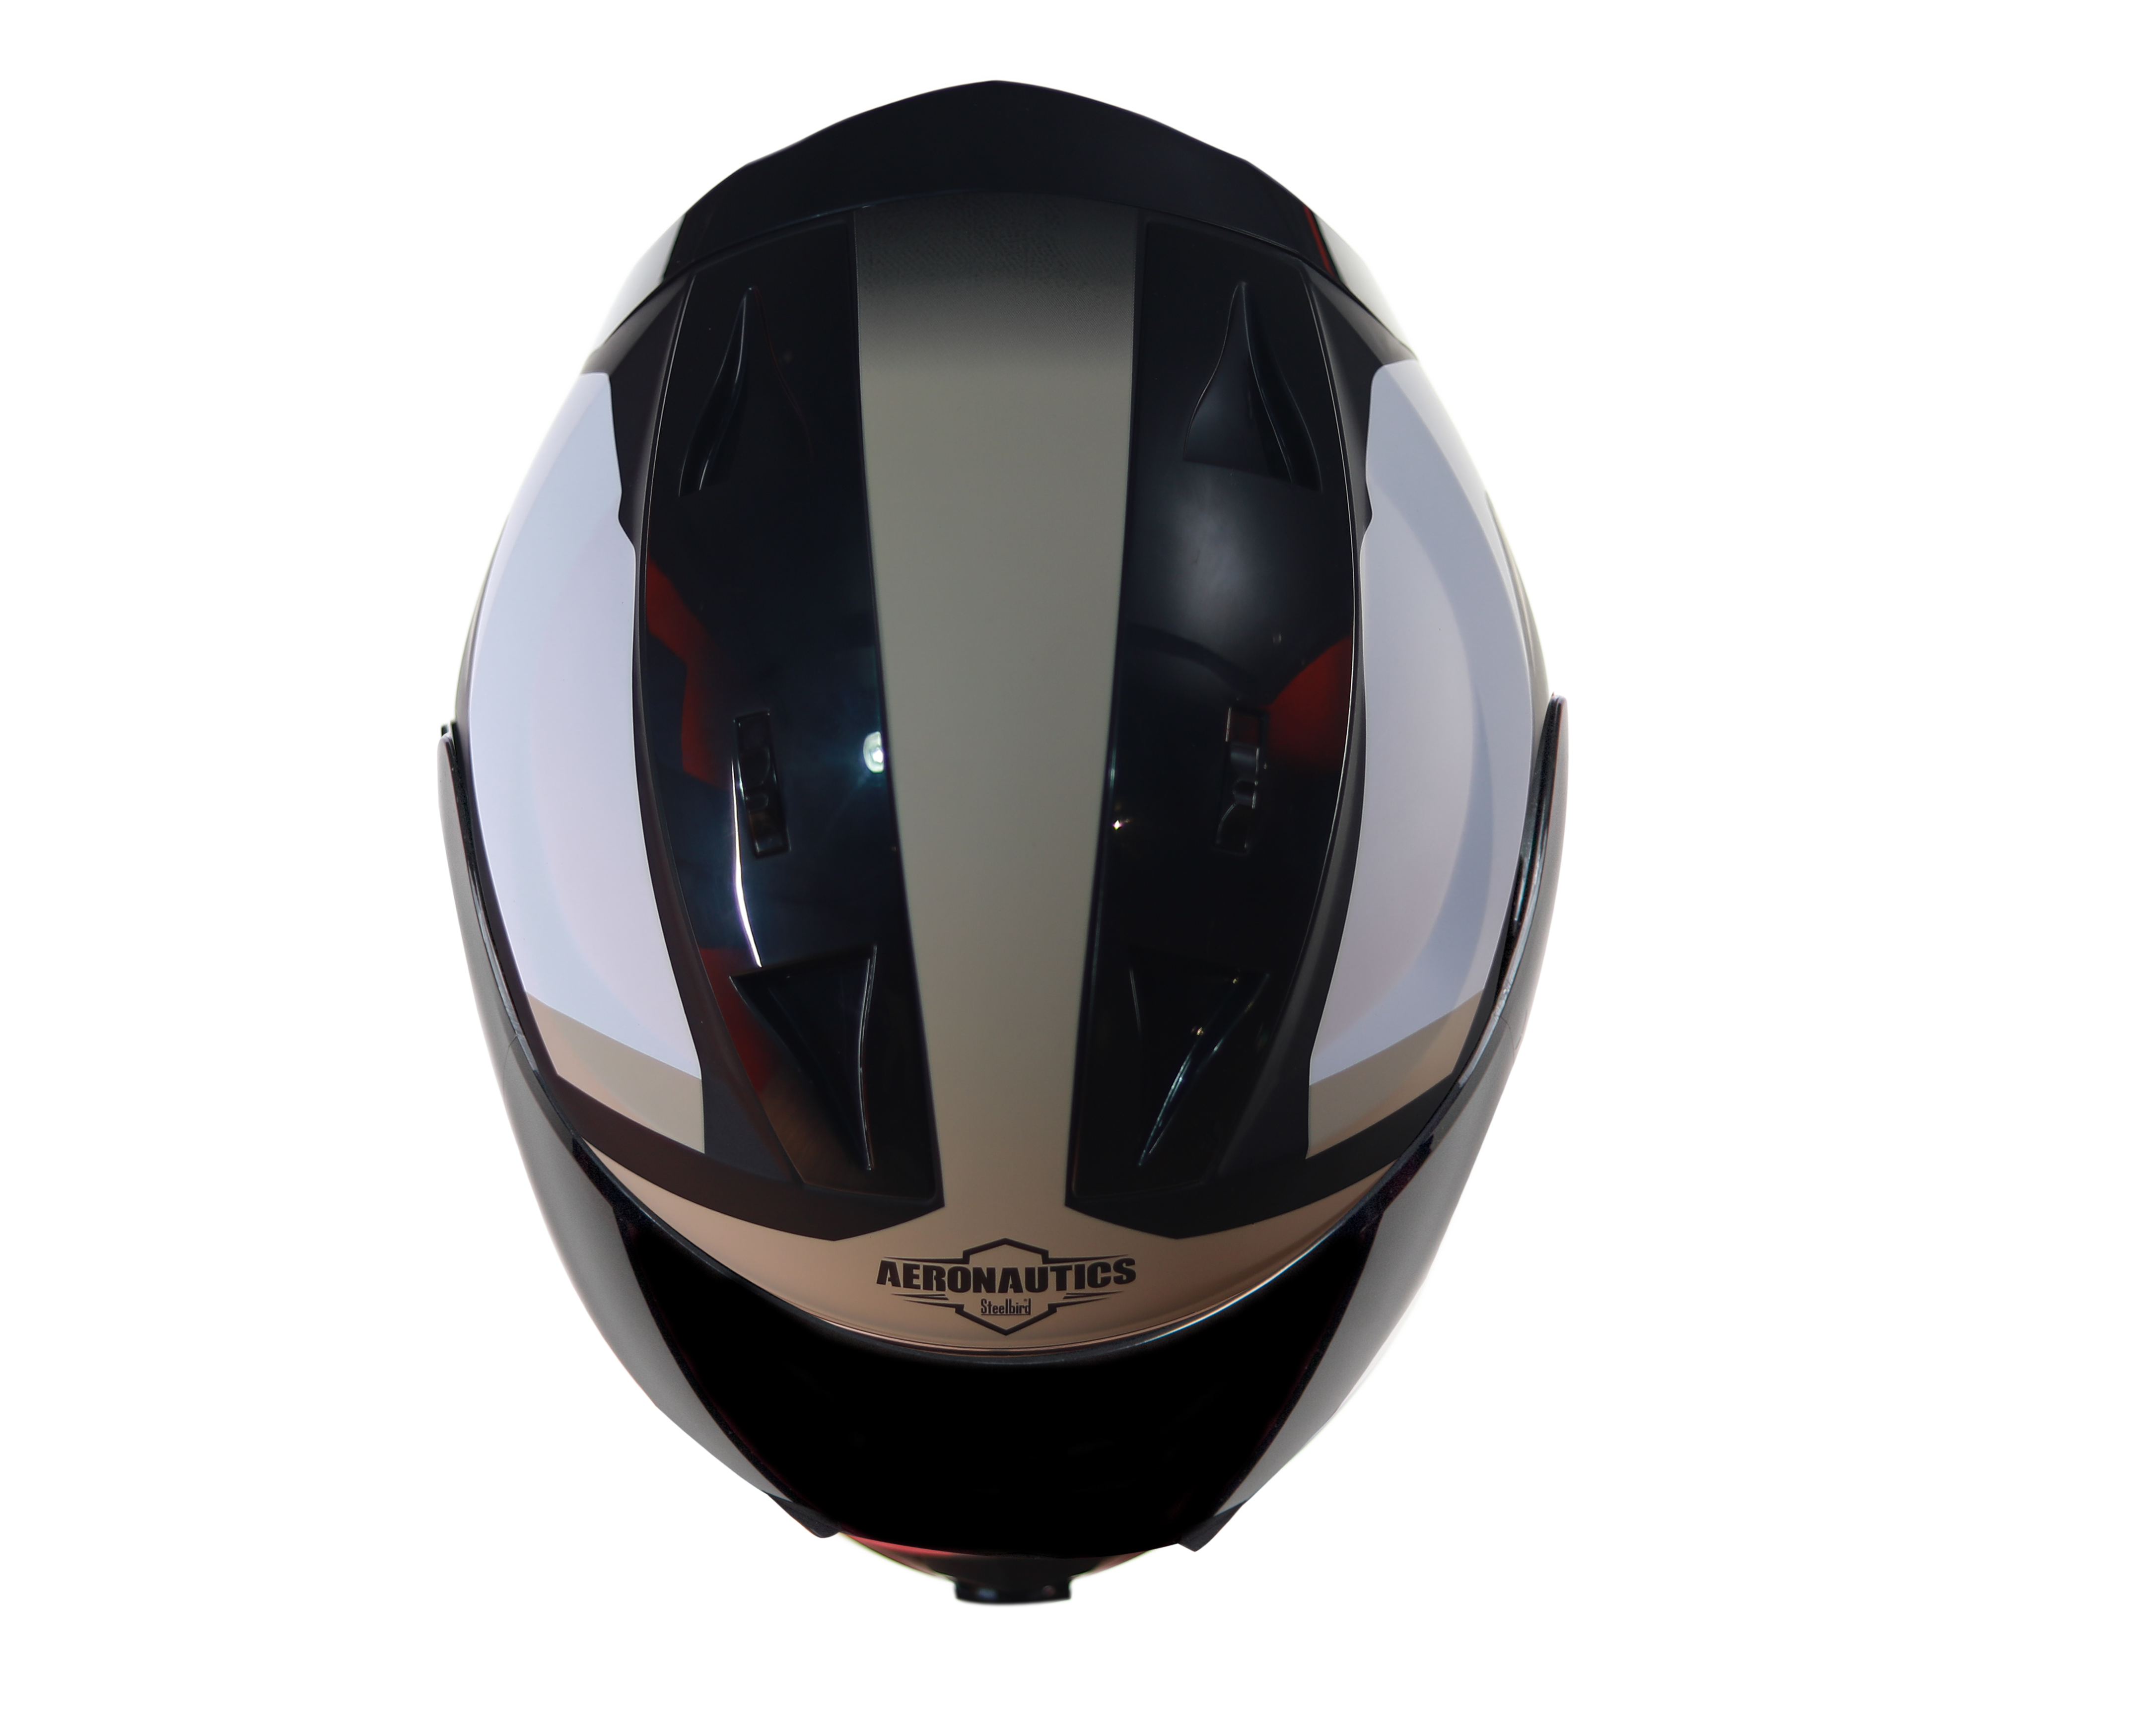 SA-1 Aerodynamics Mat Black With Desert Storm(Fitted With Clear Visor Extra Blue Chrome Visor Free)